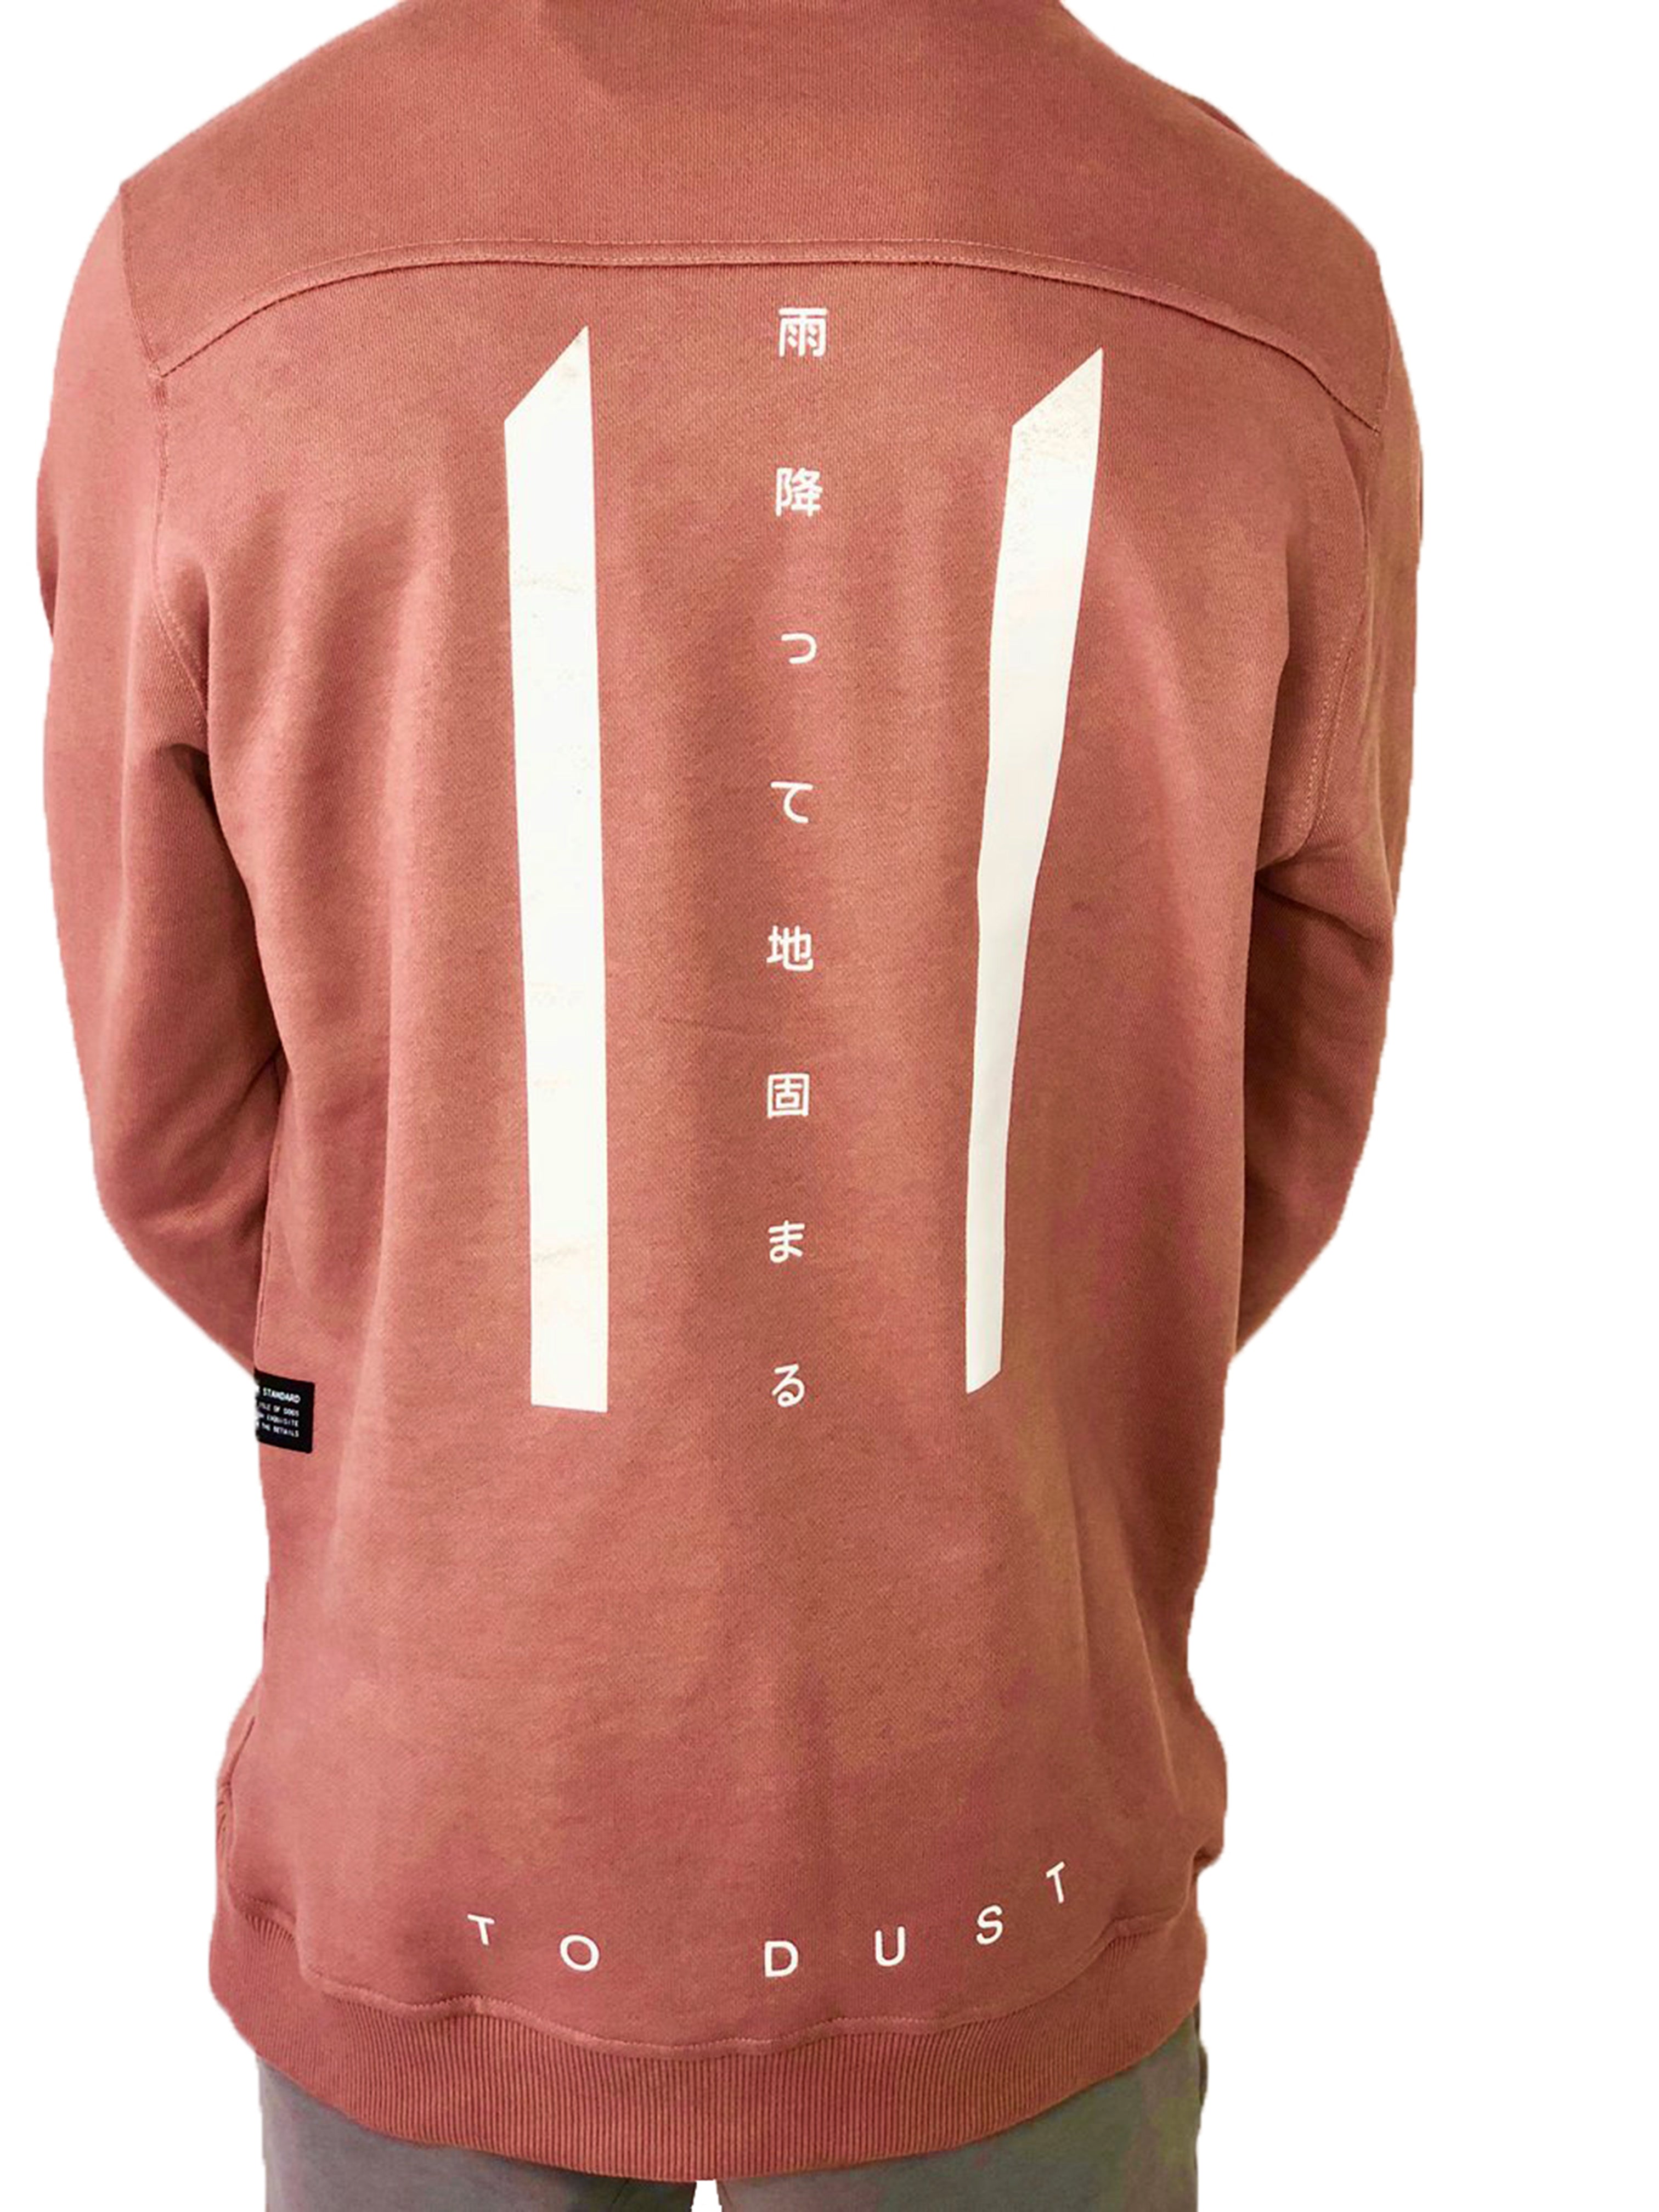 Men Sweater Pink Long Sleeve Cotton by Ashes To Dust - Brit Boss 